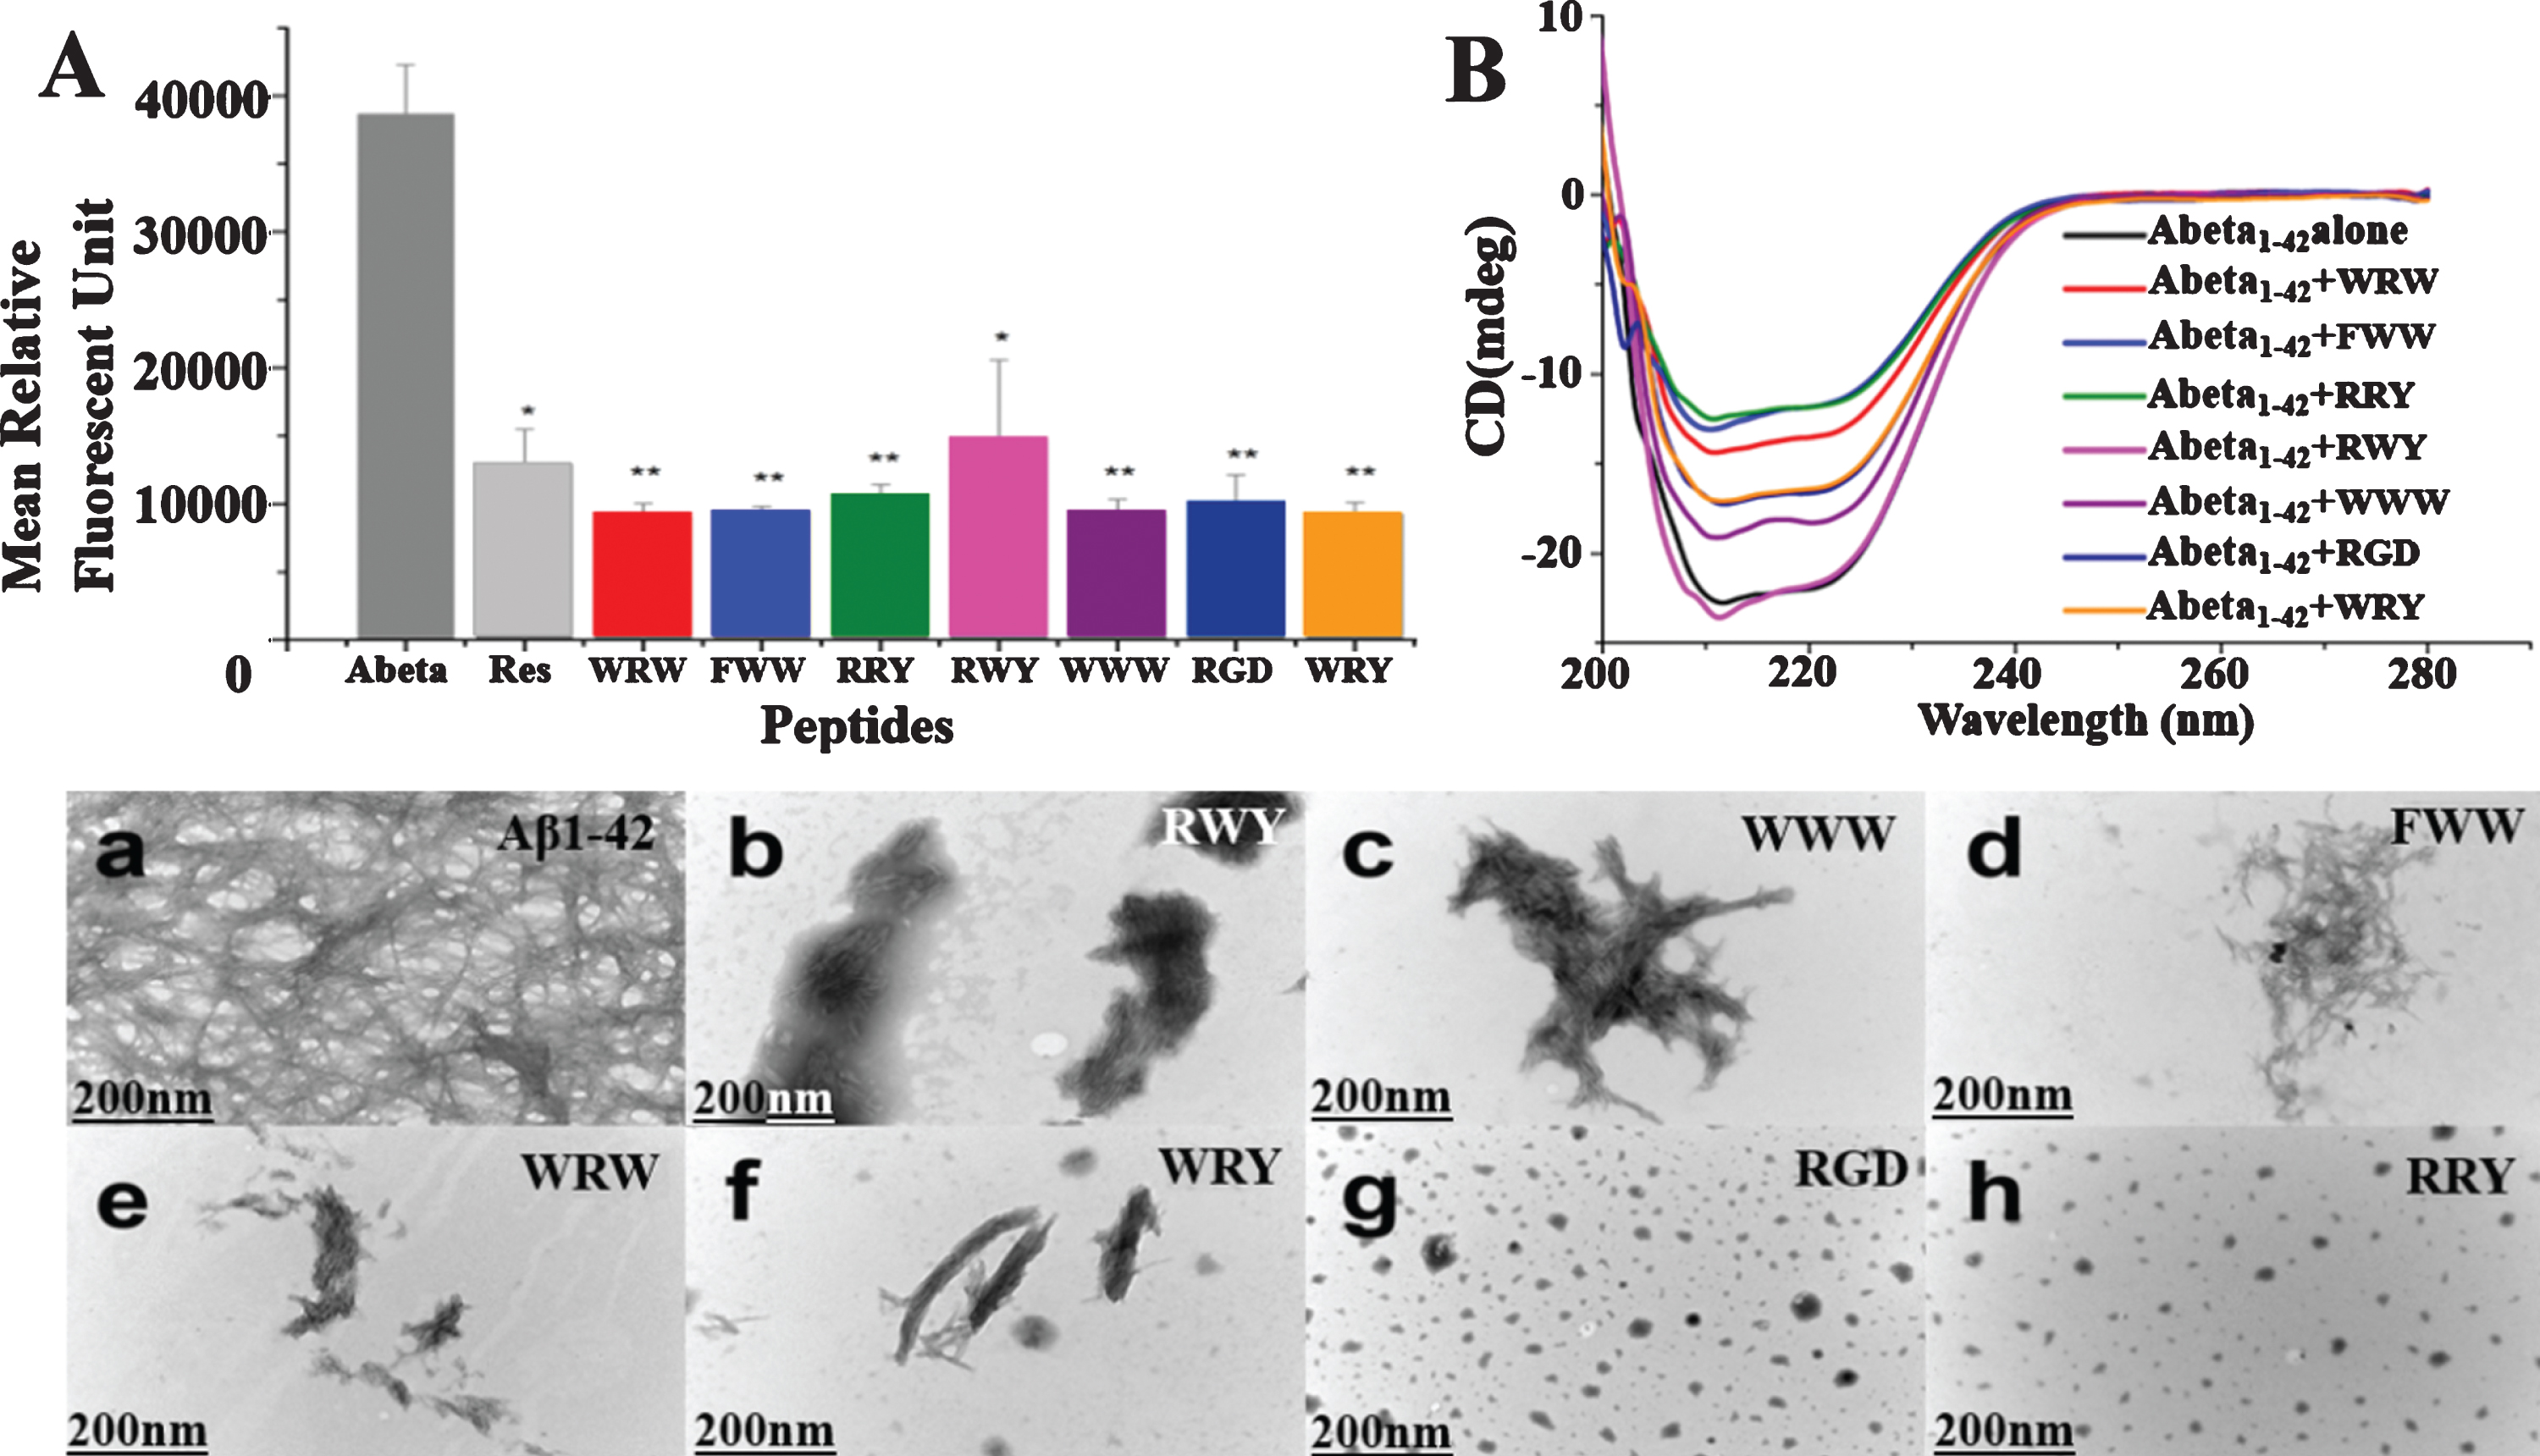 Small peptides inhibit Aβ1–42 aggregation in vitro. A) Inhibition of Aβ1–42 (2.5μM) aggregation by the 7 small peptides with resveratrol as a reference. The measurements were carried out by ThT fluorescence at 485 nm in presence of 2.5μM compounds including Resveratrol, WRW, FWW, RRY, RWY, WWW, RGD, and WRY. Most of the small peptides had higher inhibition of Aβ1–42 aggregation than the reference compound resveratrol. The mean relative fluorescence unit of Aβ1–42 and Aβ1–42 incubated with the compounds were statistically different. The values were the means±S.E.M (*p < 0.05; **p < 0.01, n = 6). B) CD spectroscopy showed less β-sheet structure formation signal in the peptide-Aβ complexes. Aβ1–42 (5μM) samples were incubated at 37°C for 48 h alone (black line) or in the presences of RWY (5μM) (light purple), WWW (5μM) (dark purple), RGD (5μM) (dark blue), WRY (5μM) (orange), WRW (5μM) (red), FWW (5μM) (light blue), or RRY (5μM) (green), respectively. In lower panel, small peptides inhibit the aggregation of Aβ1–42 under negative stains TEM. Samples were dissolved (25μM) and incubated at 37°C for 48 h. a) Aβ1–42 peptide alone. Long linear Aβ1–42 fibrils were shown. The fibrils compact in parallel bundles and intercross with each other, forming radial nucleation center, which was shown with arrowheads. b-h) Aβ1–42 treated with small peptides. Only a few short fibrils (b, c, d, e, f) or amorphous aggregates (g, h) are seen. Fibrils and amorphous were also shown with arrowheads. Scale bar = 200 nm.